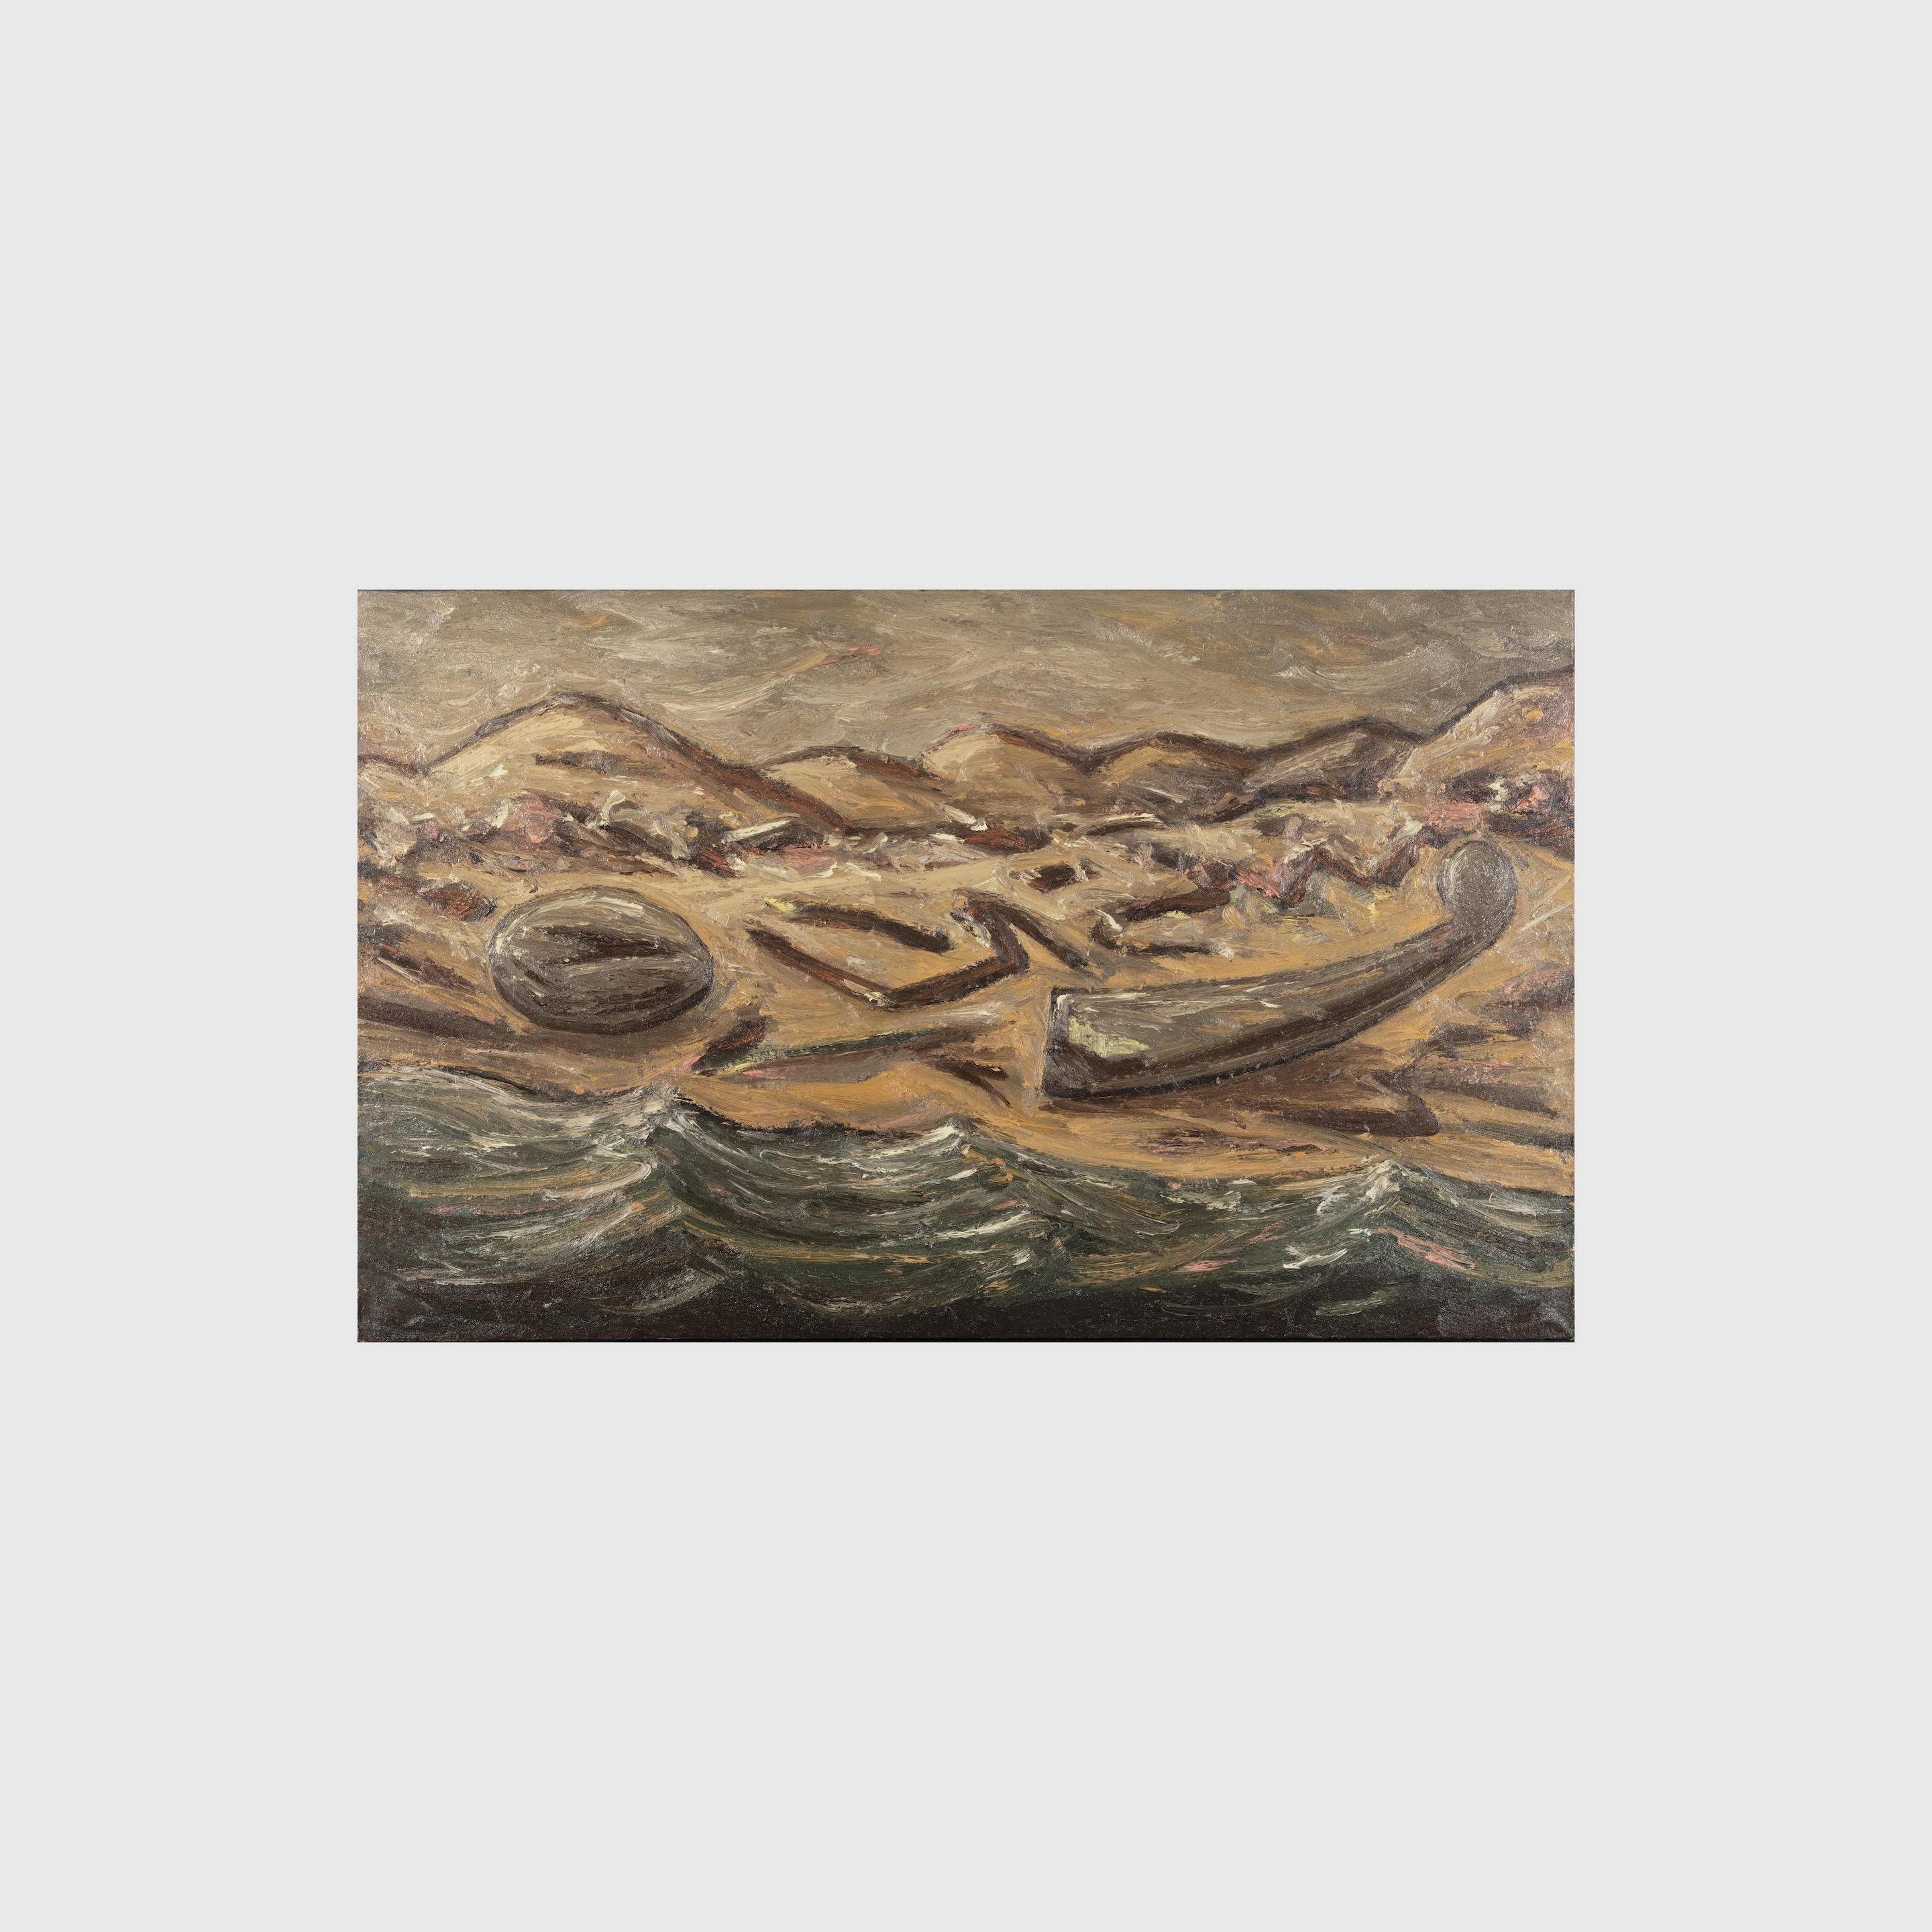 Painting (Strange Landscape with Sea), 1985 by Peter Booth, 1985